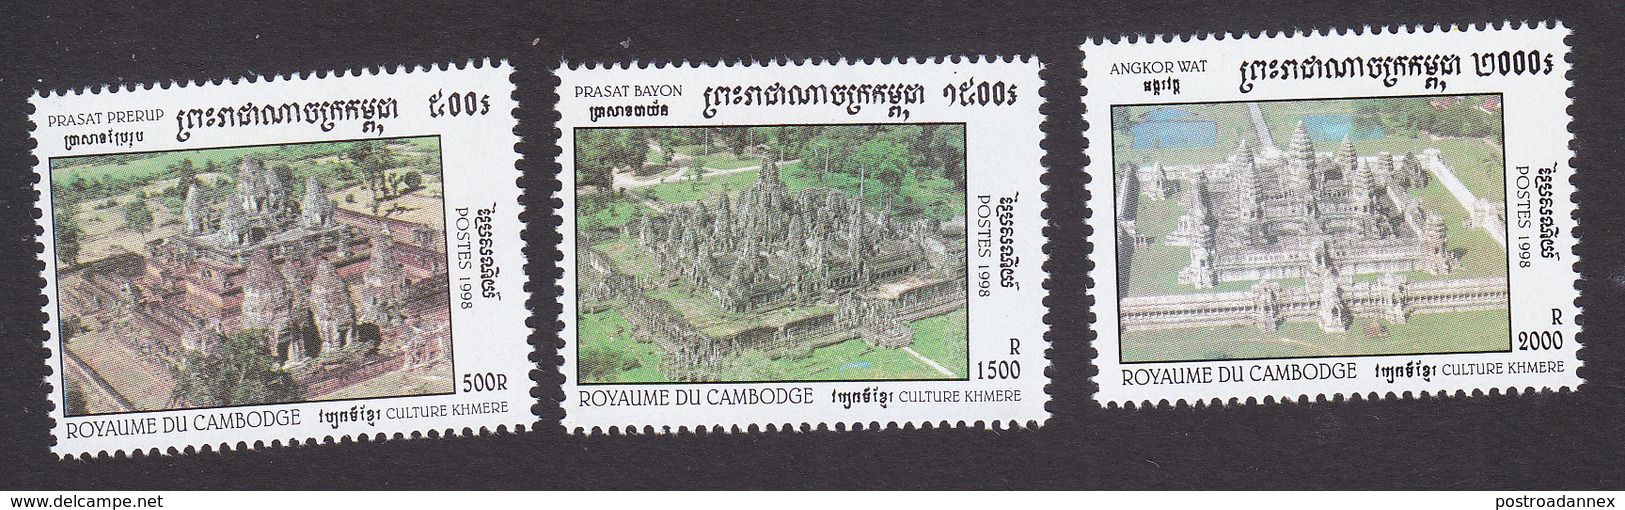 Cambodia, Scott #1748-1750, Mint Hinged, Khmer Culture, Issued 1998 - Cambodia